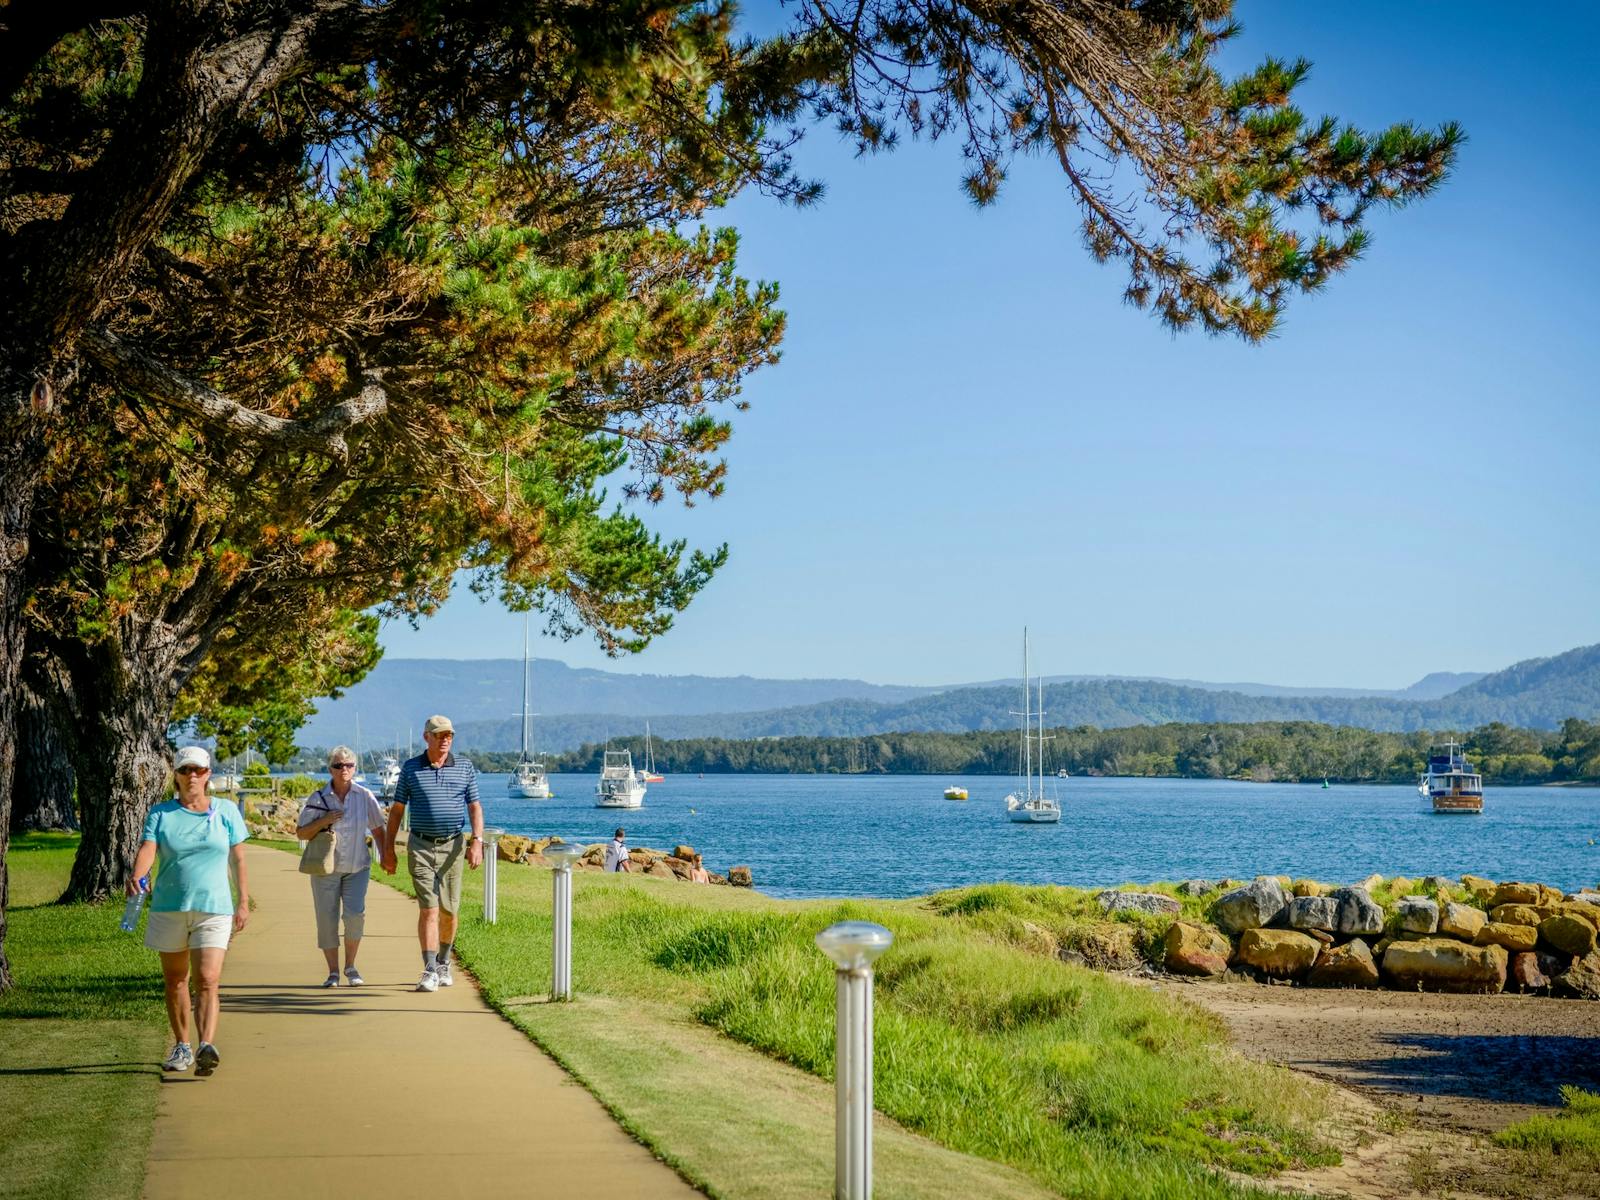 Explore the river bank on the accessible pathway at Greenwell Point, home of oysters and seafood!